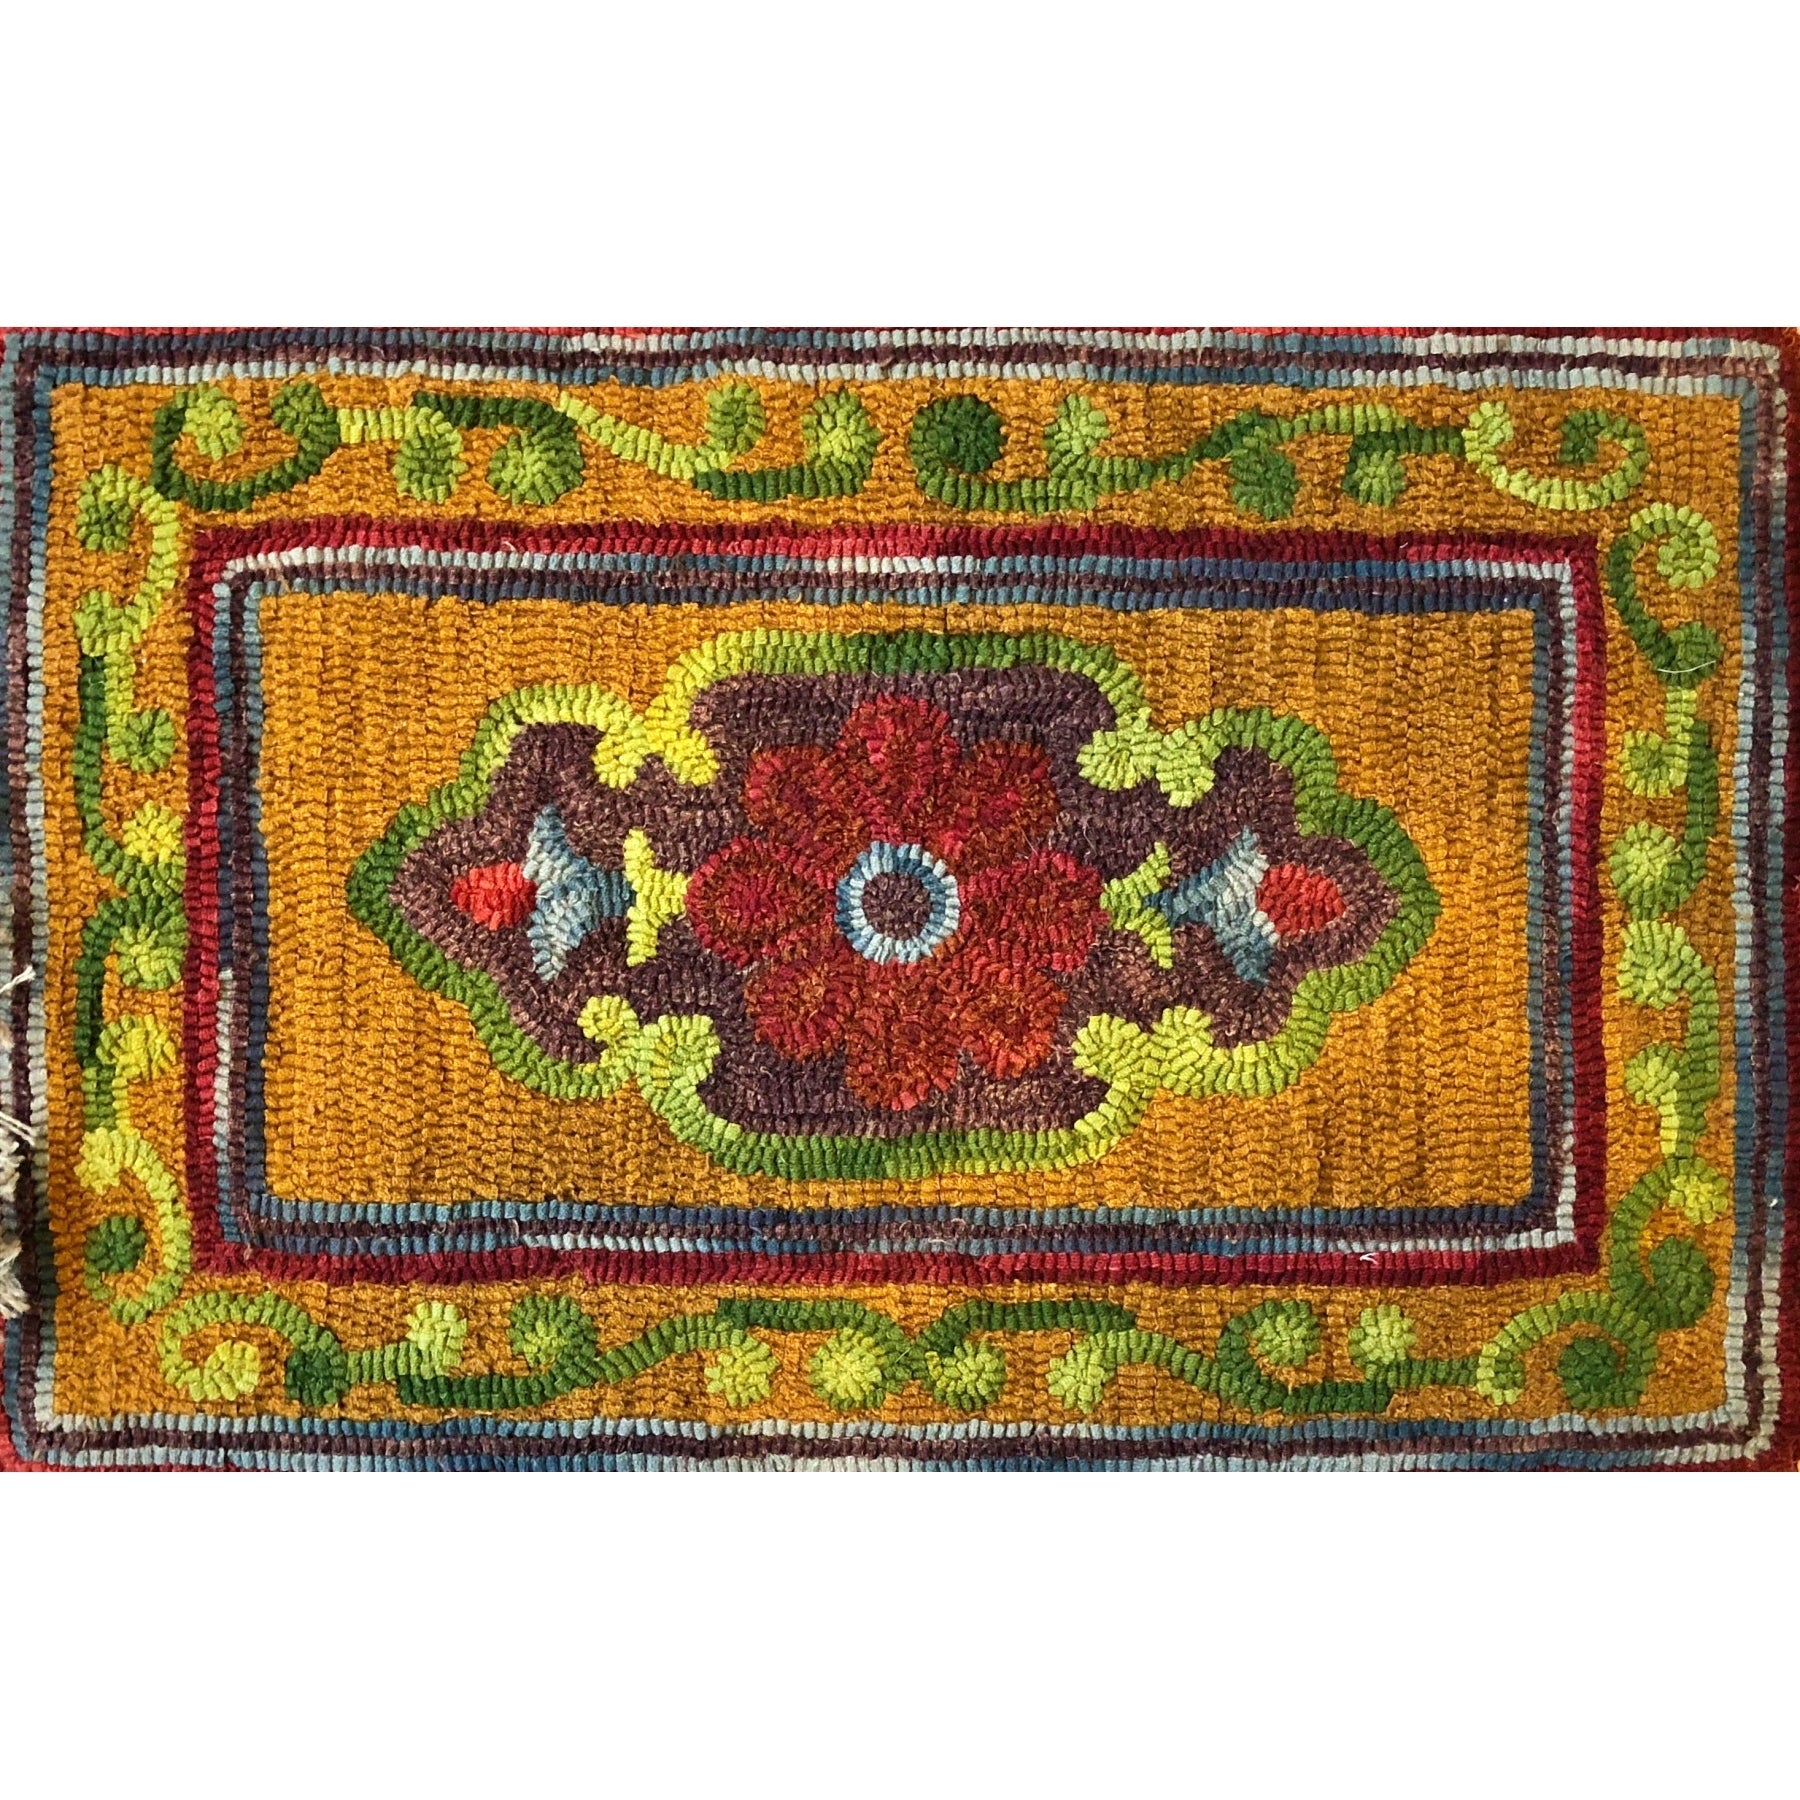 First Thought, rug hooked by Kim Meyer